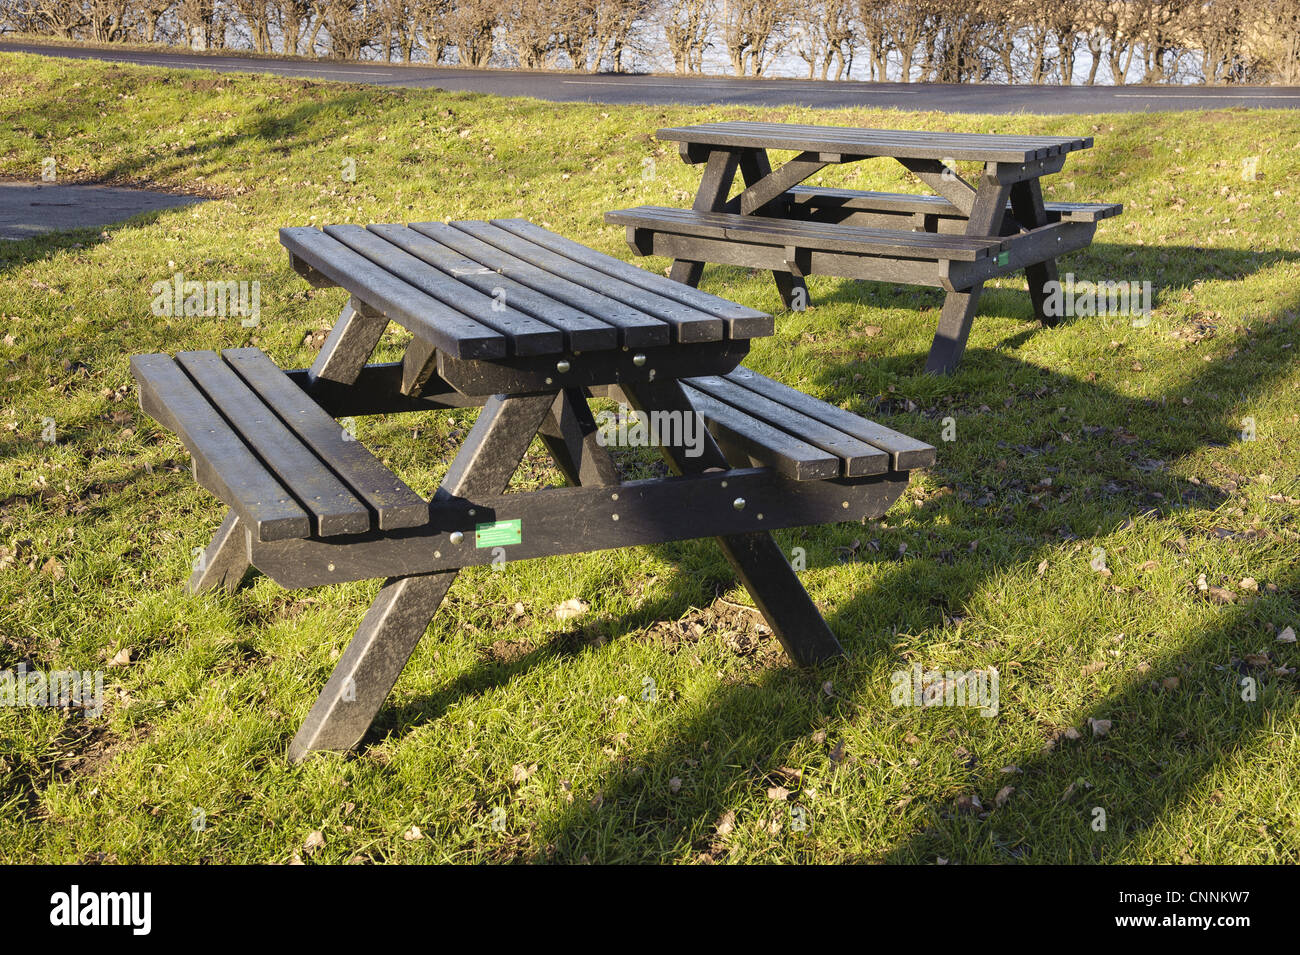 Outdoor plastic furniture, made from recycled plastic bottles, Bubwith, Selby, East Riding of Yorkshire, England, january Stock Photo